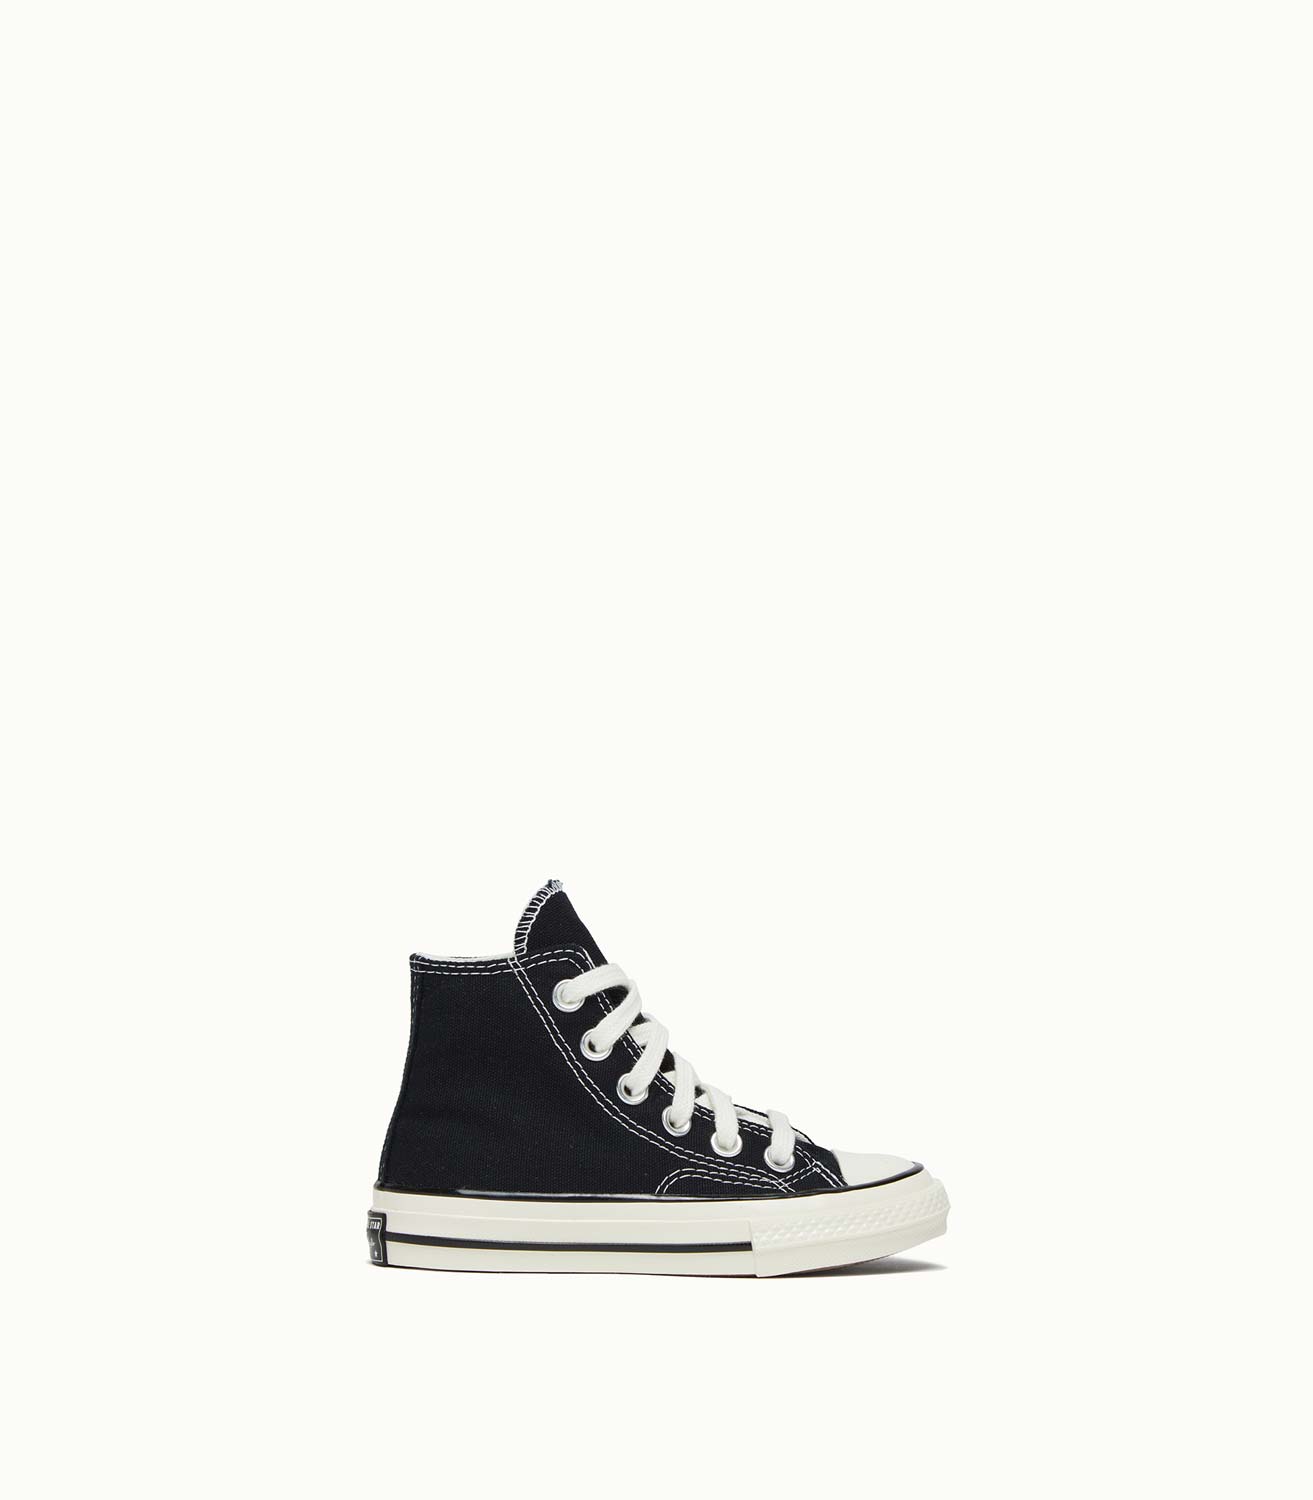 CONVERSE CHUCK 70 HI SNEAKERS COLOR | Playground